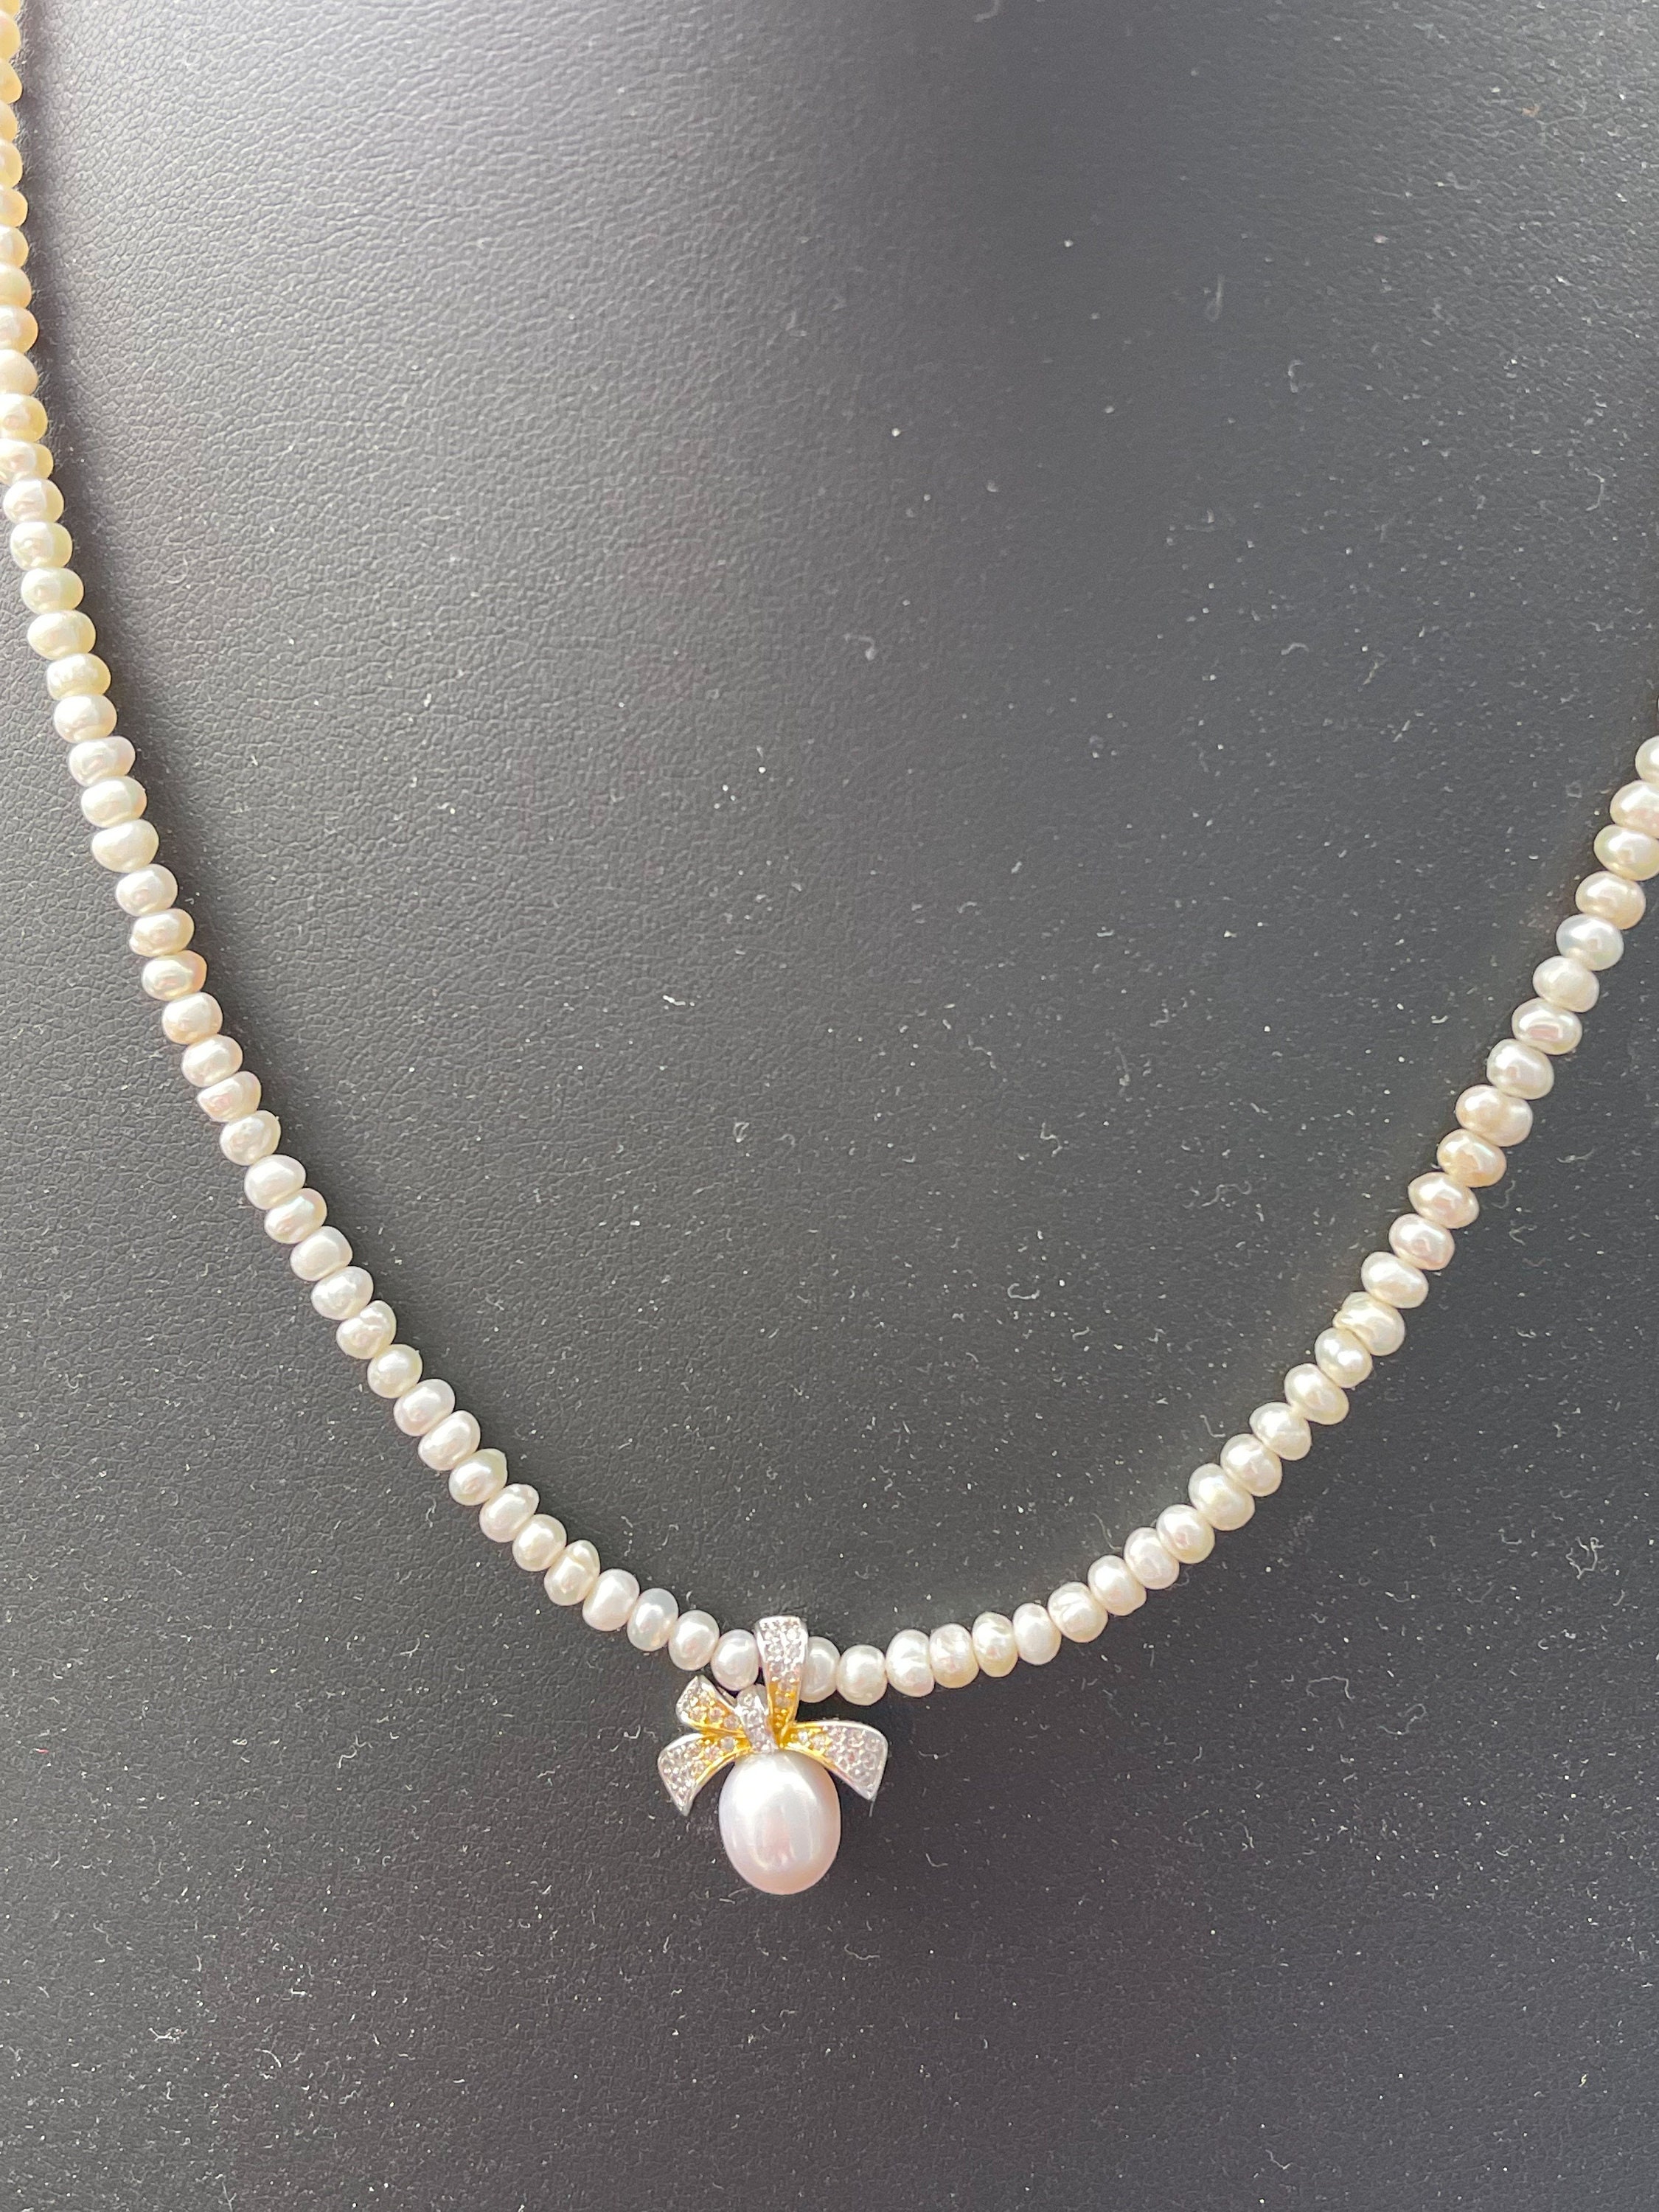 Pearl and Cubic Zirconia Necklace - Etsy